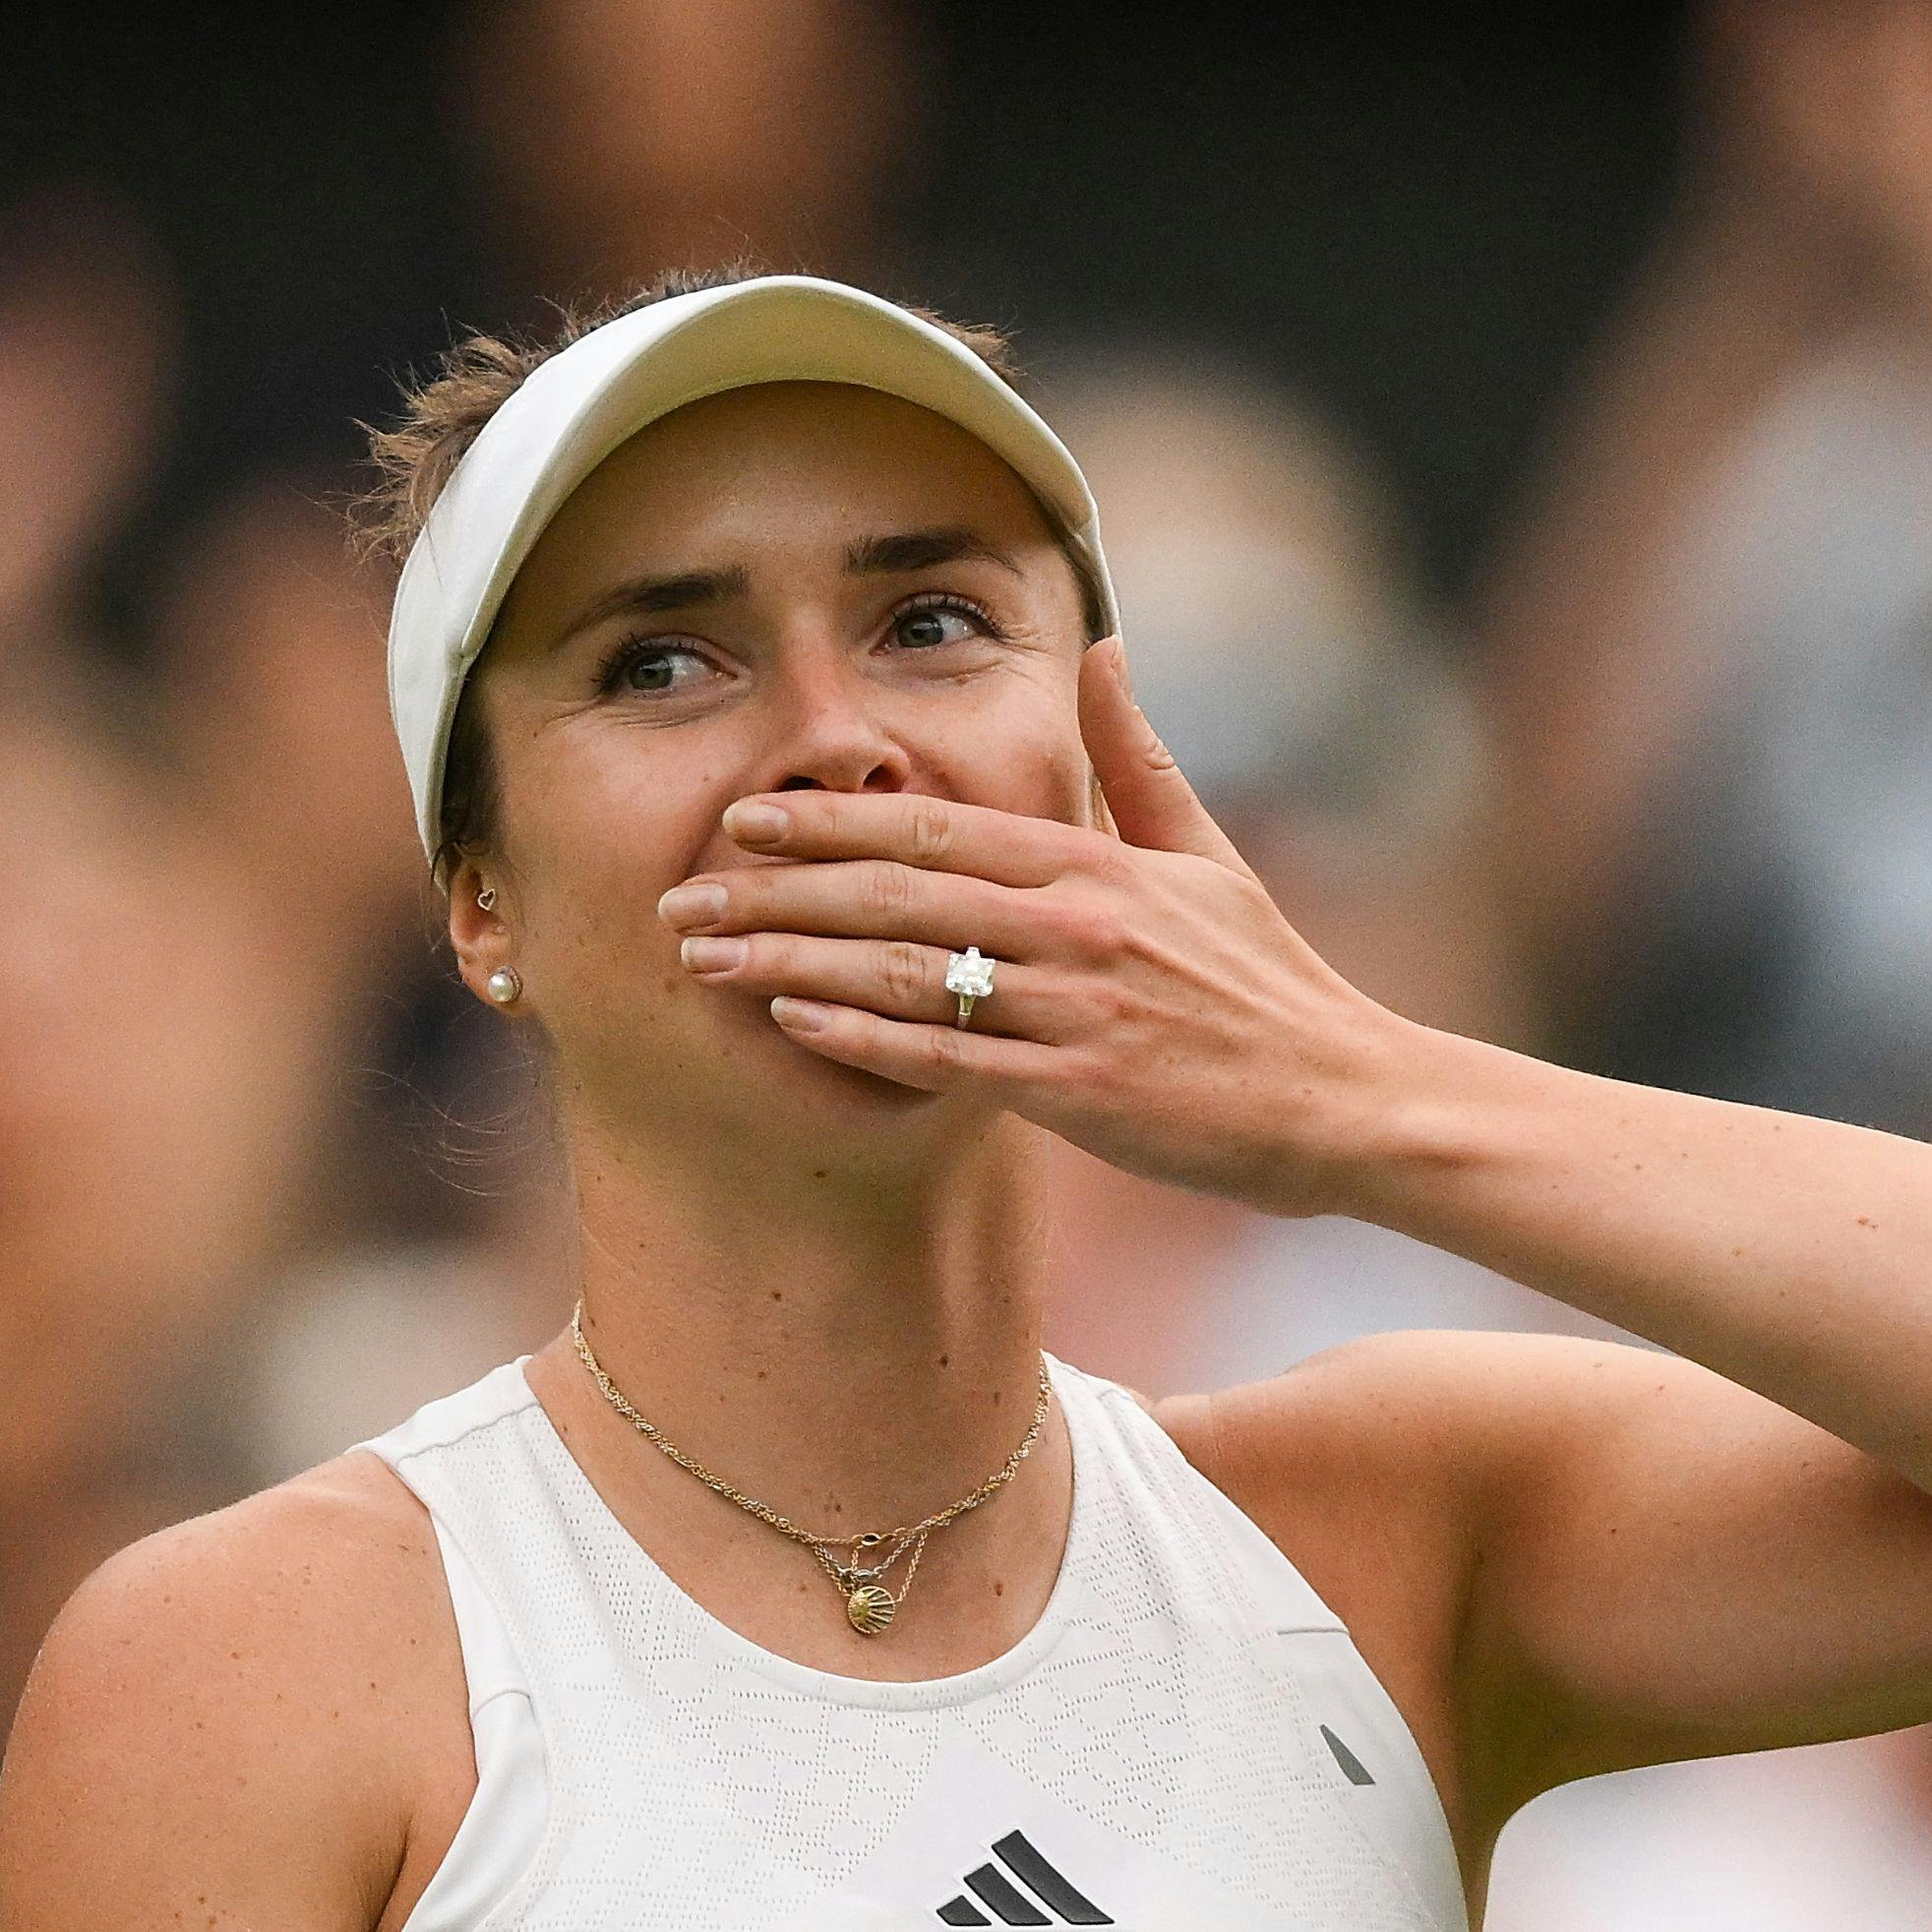 TOPSHOT - Ukraine's Elina Svitolina blows a kiss as she celebrates winning against Poland's Iga Swiatek during their women's singles quarter-finals tennis match on the ninth day of the 2023 Wimbledon Championships at The All England Tennis Club in Wimbledon, southwest London, on July 11, 2023. (Photo by Daniel LEAL / AFP) / RESTRICTED TO EDITORIAL USE